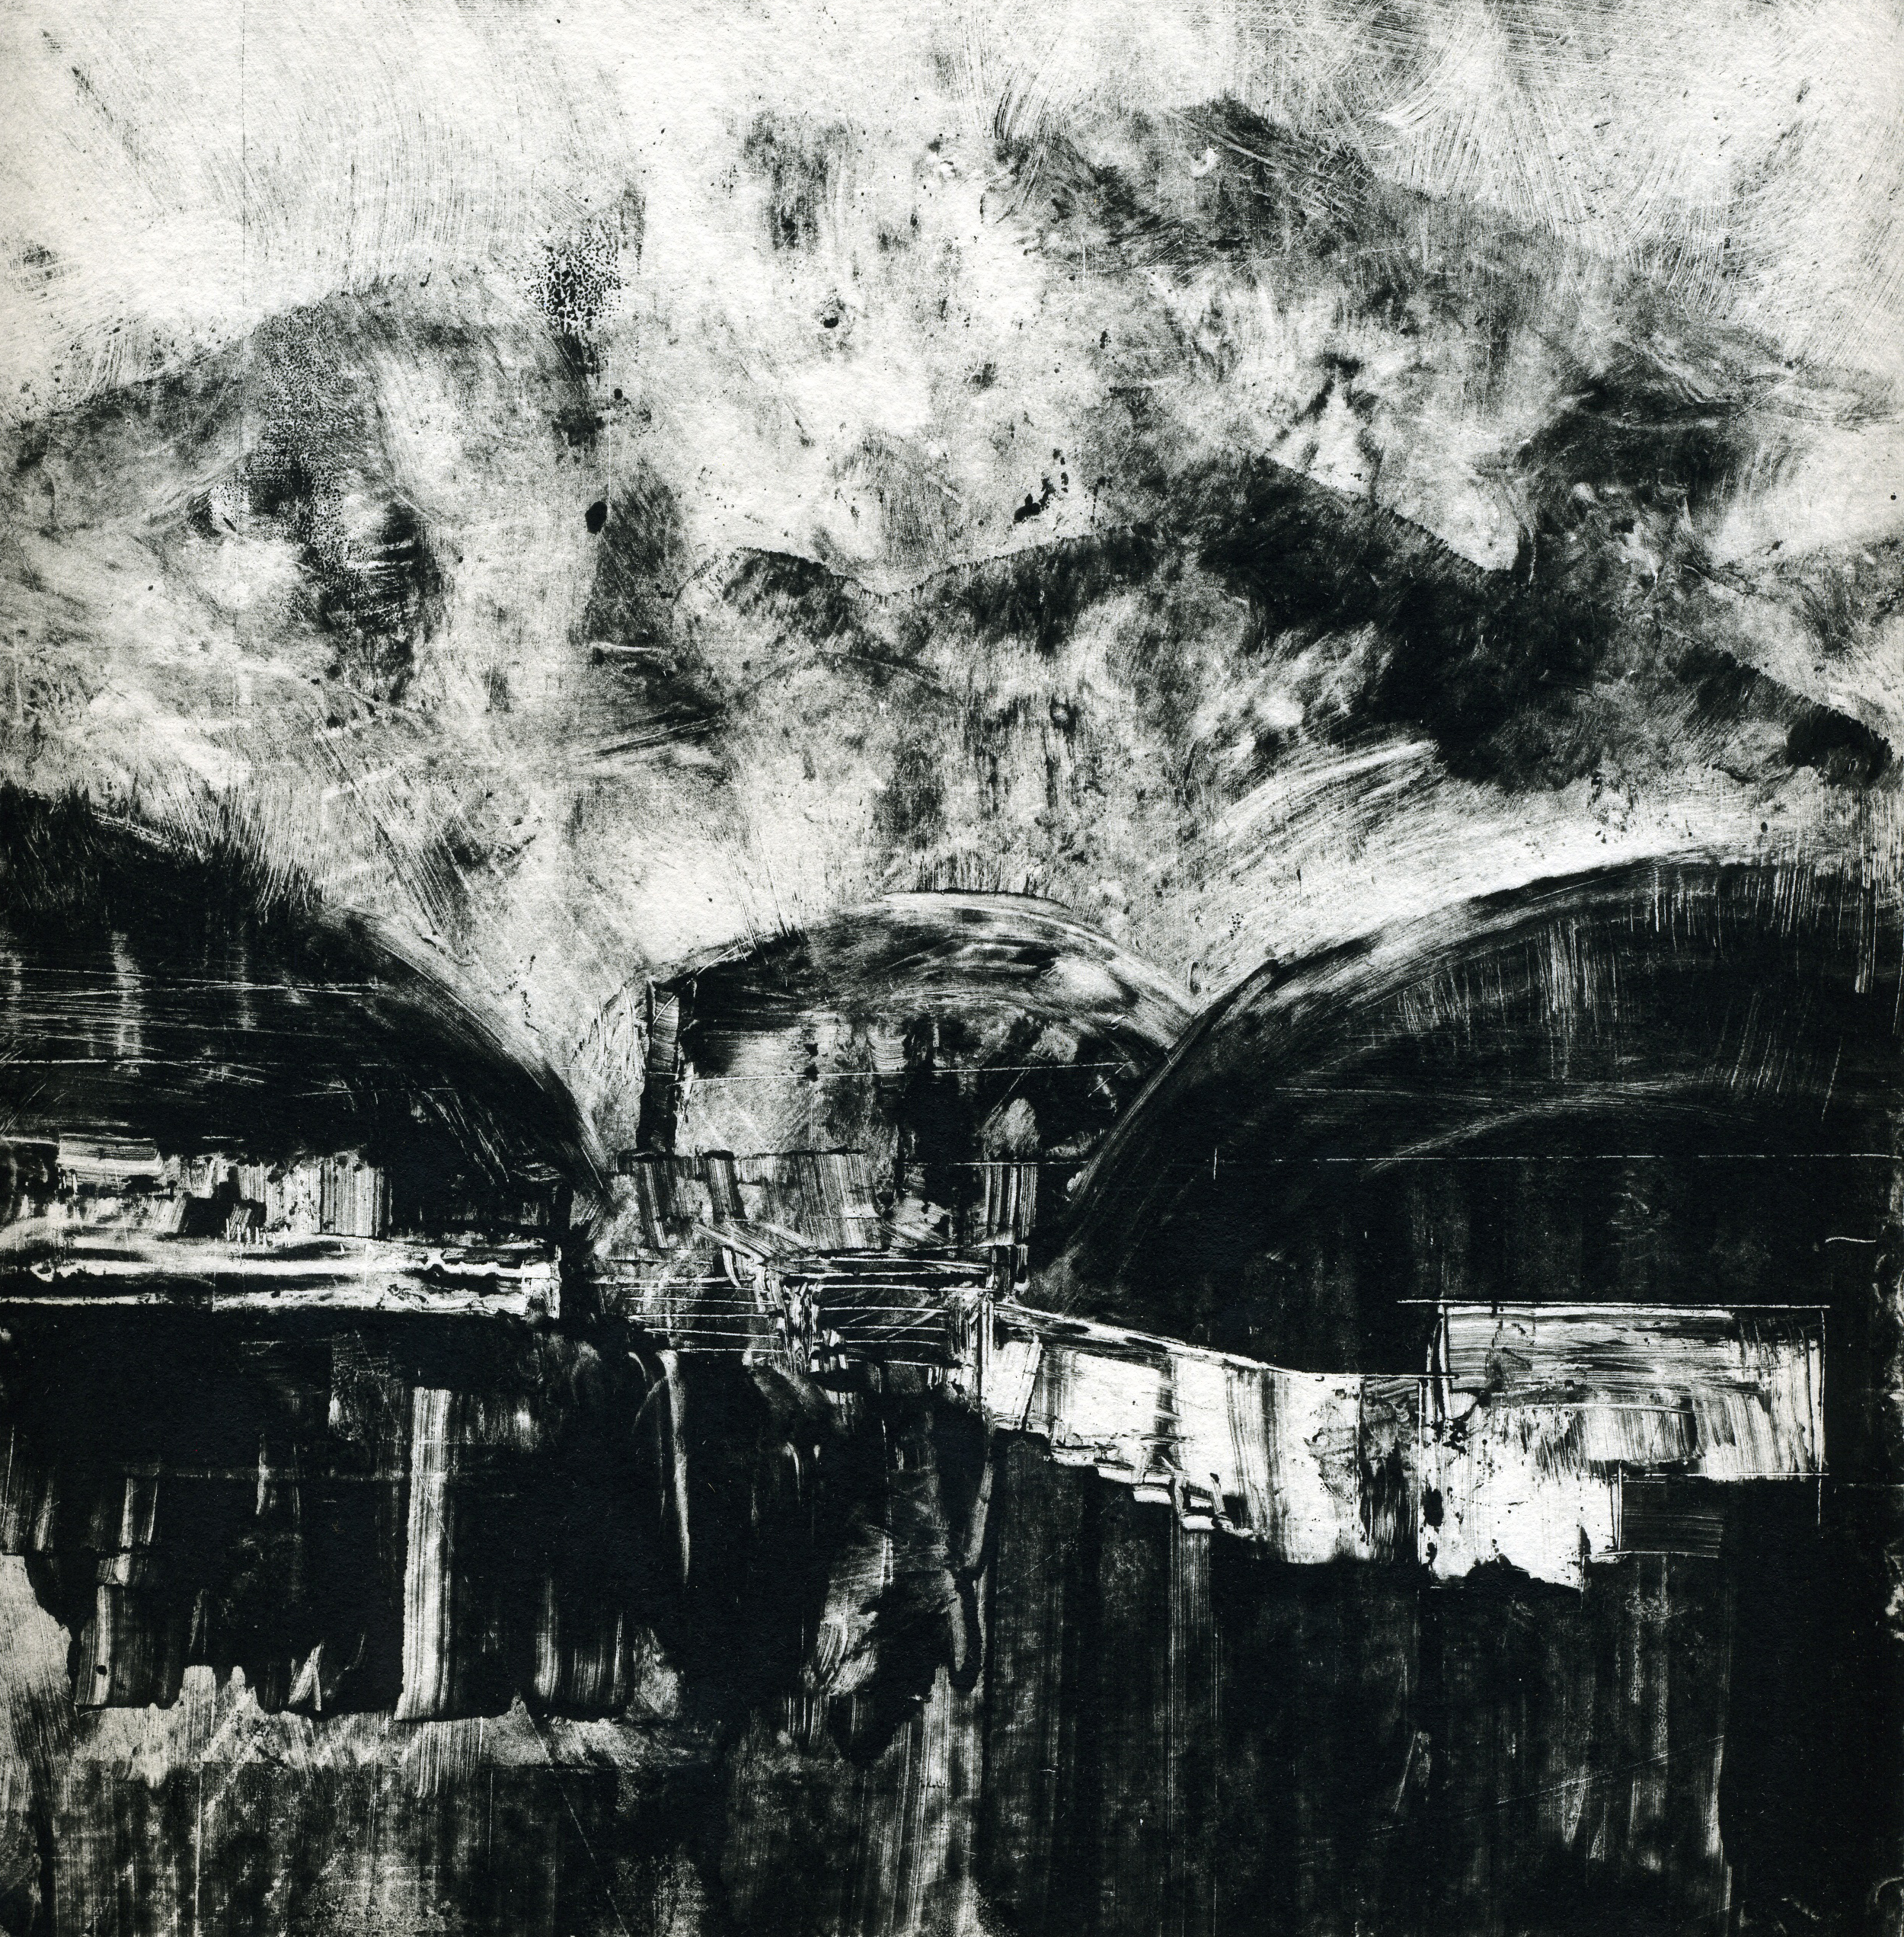  A monotype print by Clive Knights inspired by a visit to the Massa Carrara marble mines 